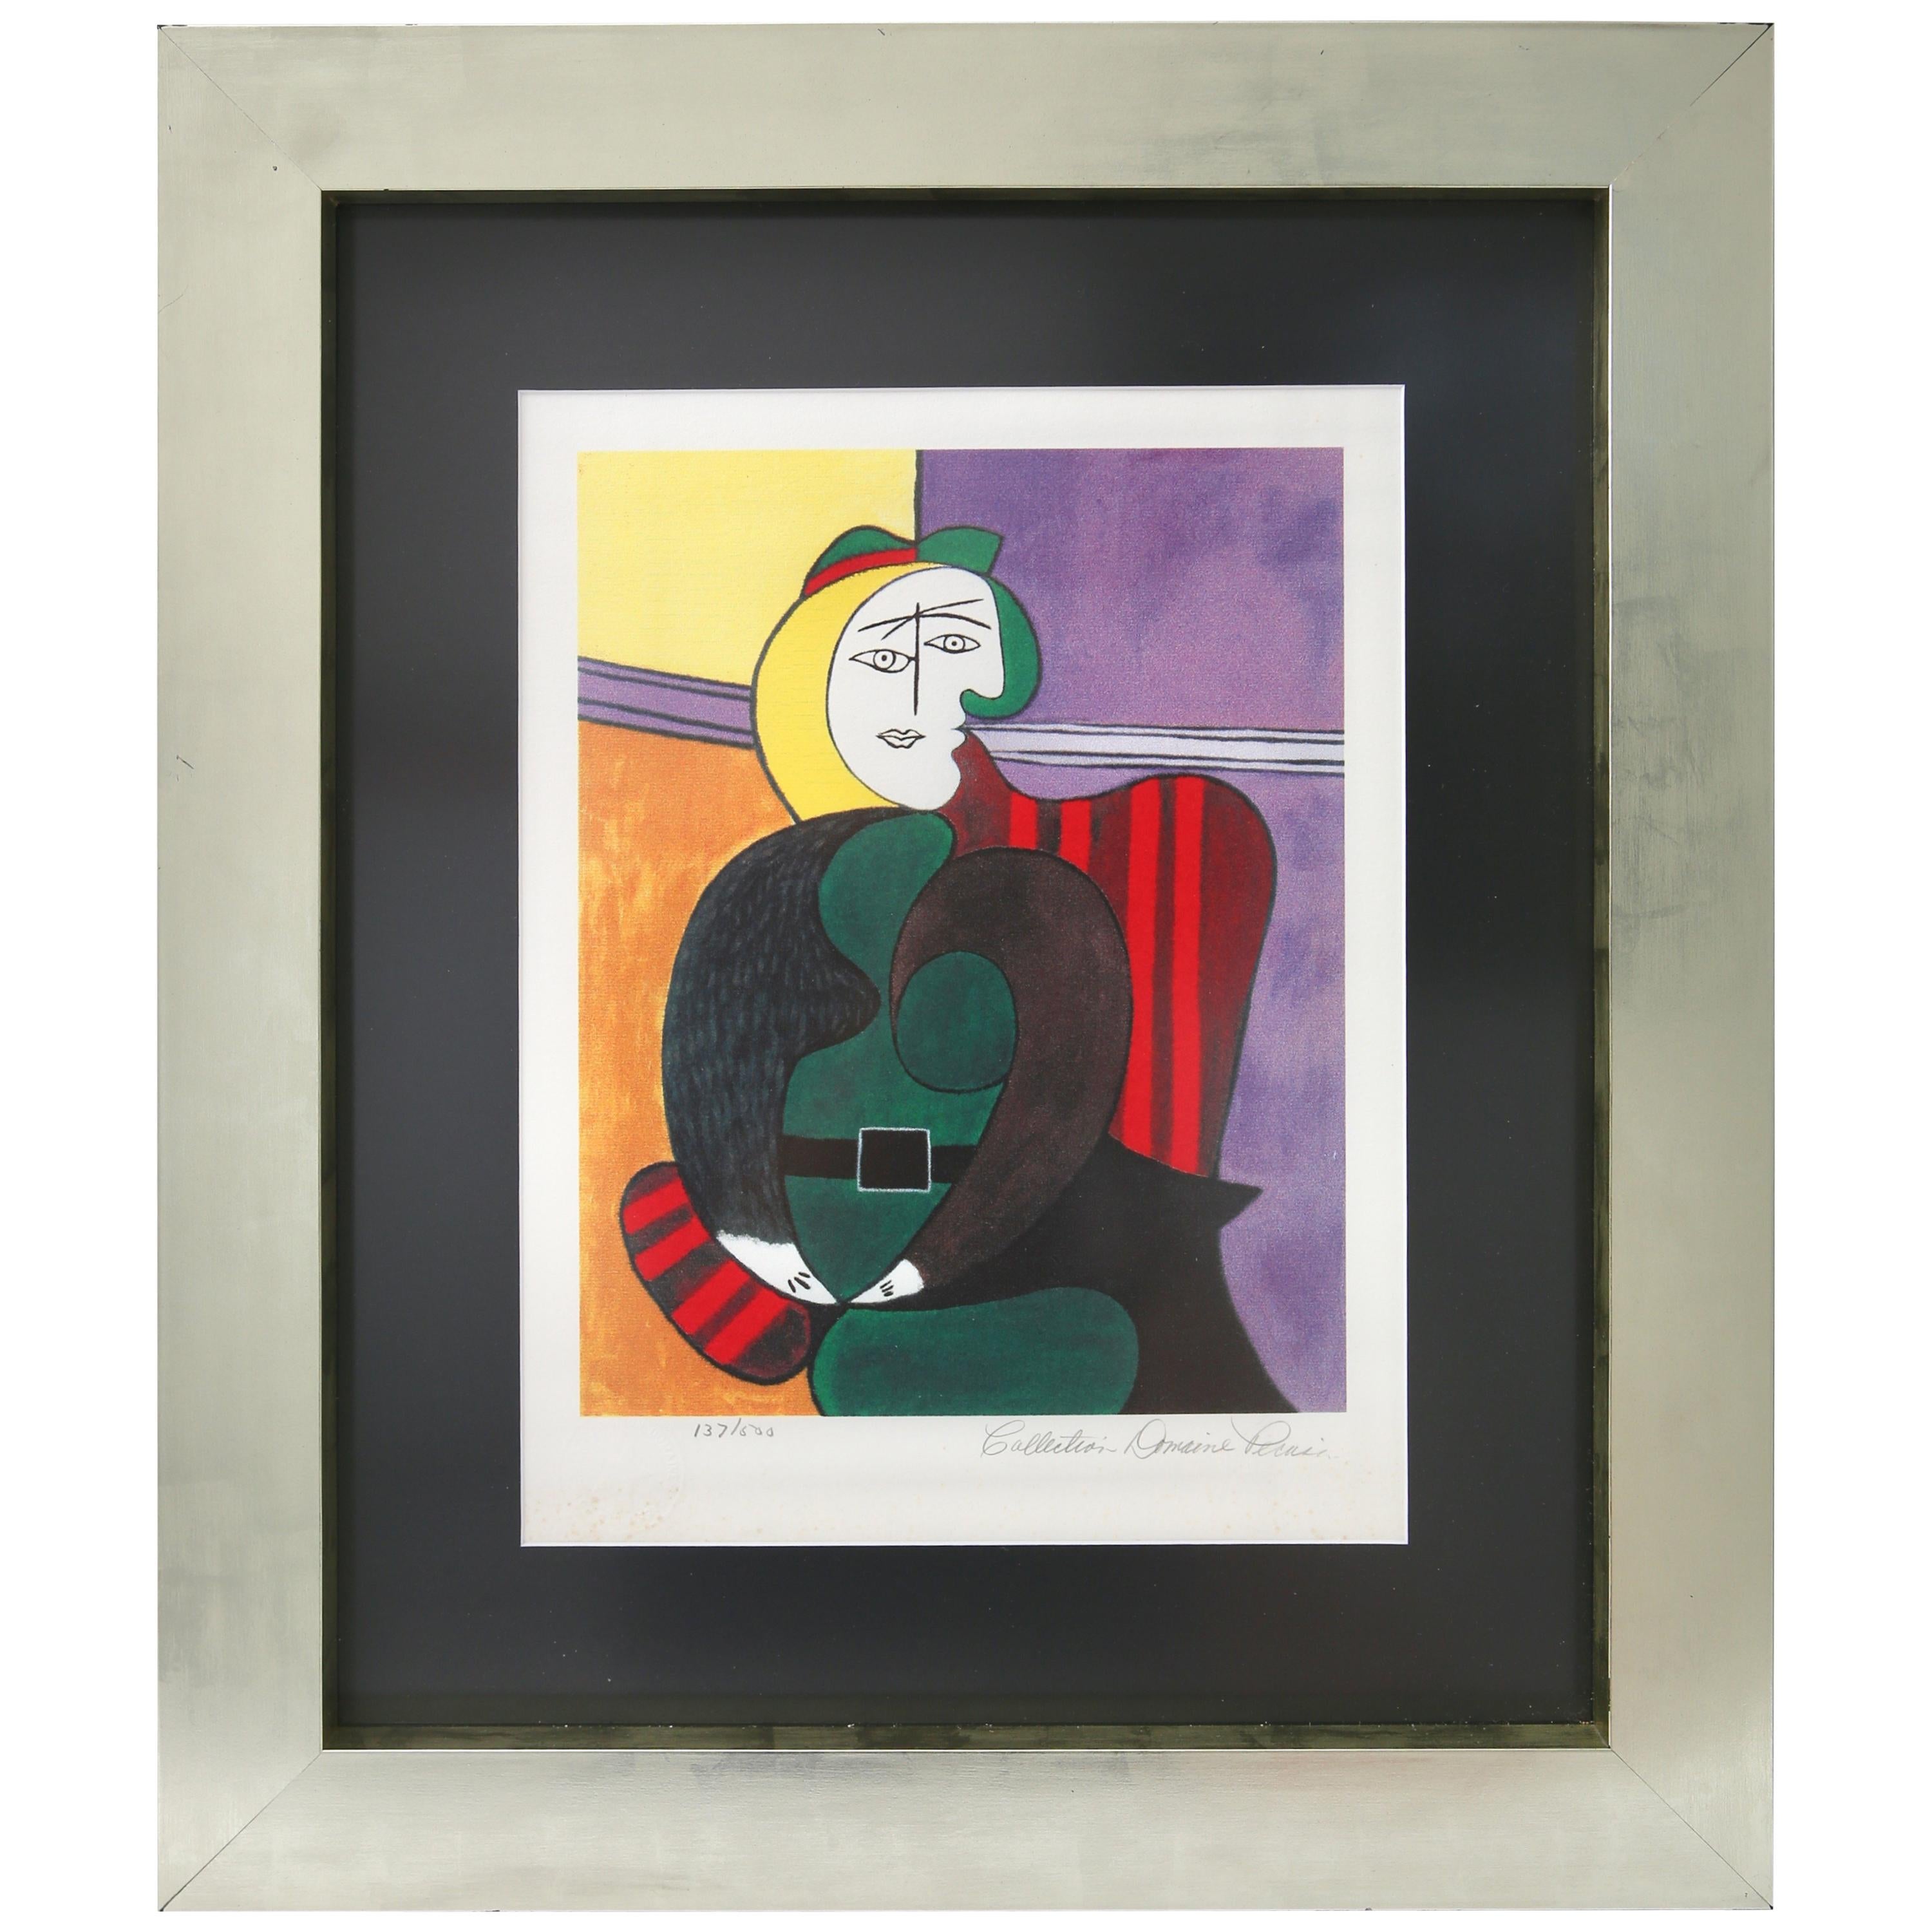 Pablo Picasso Estate Signed Limited Edition Lithograph